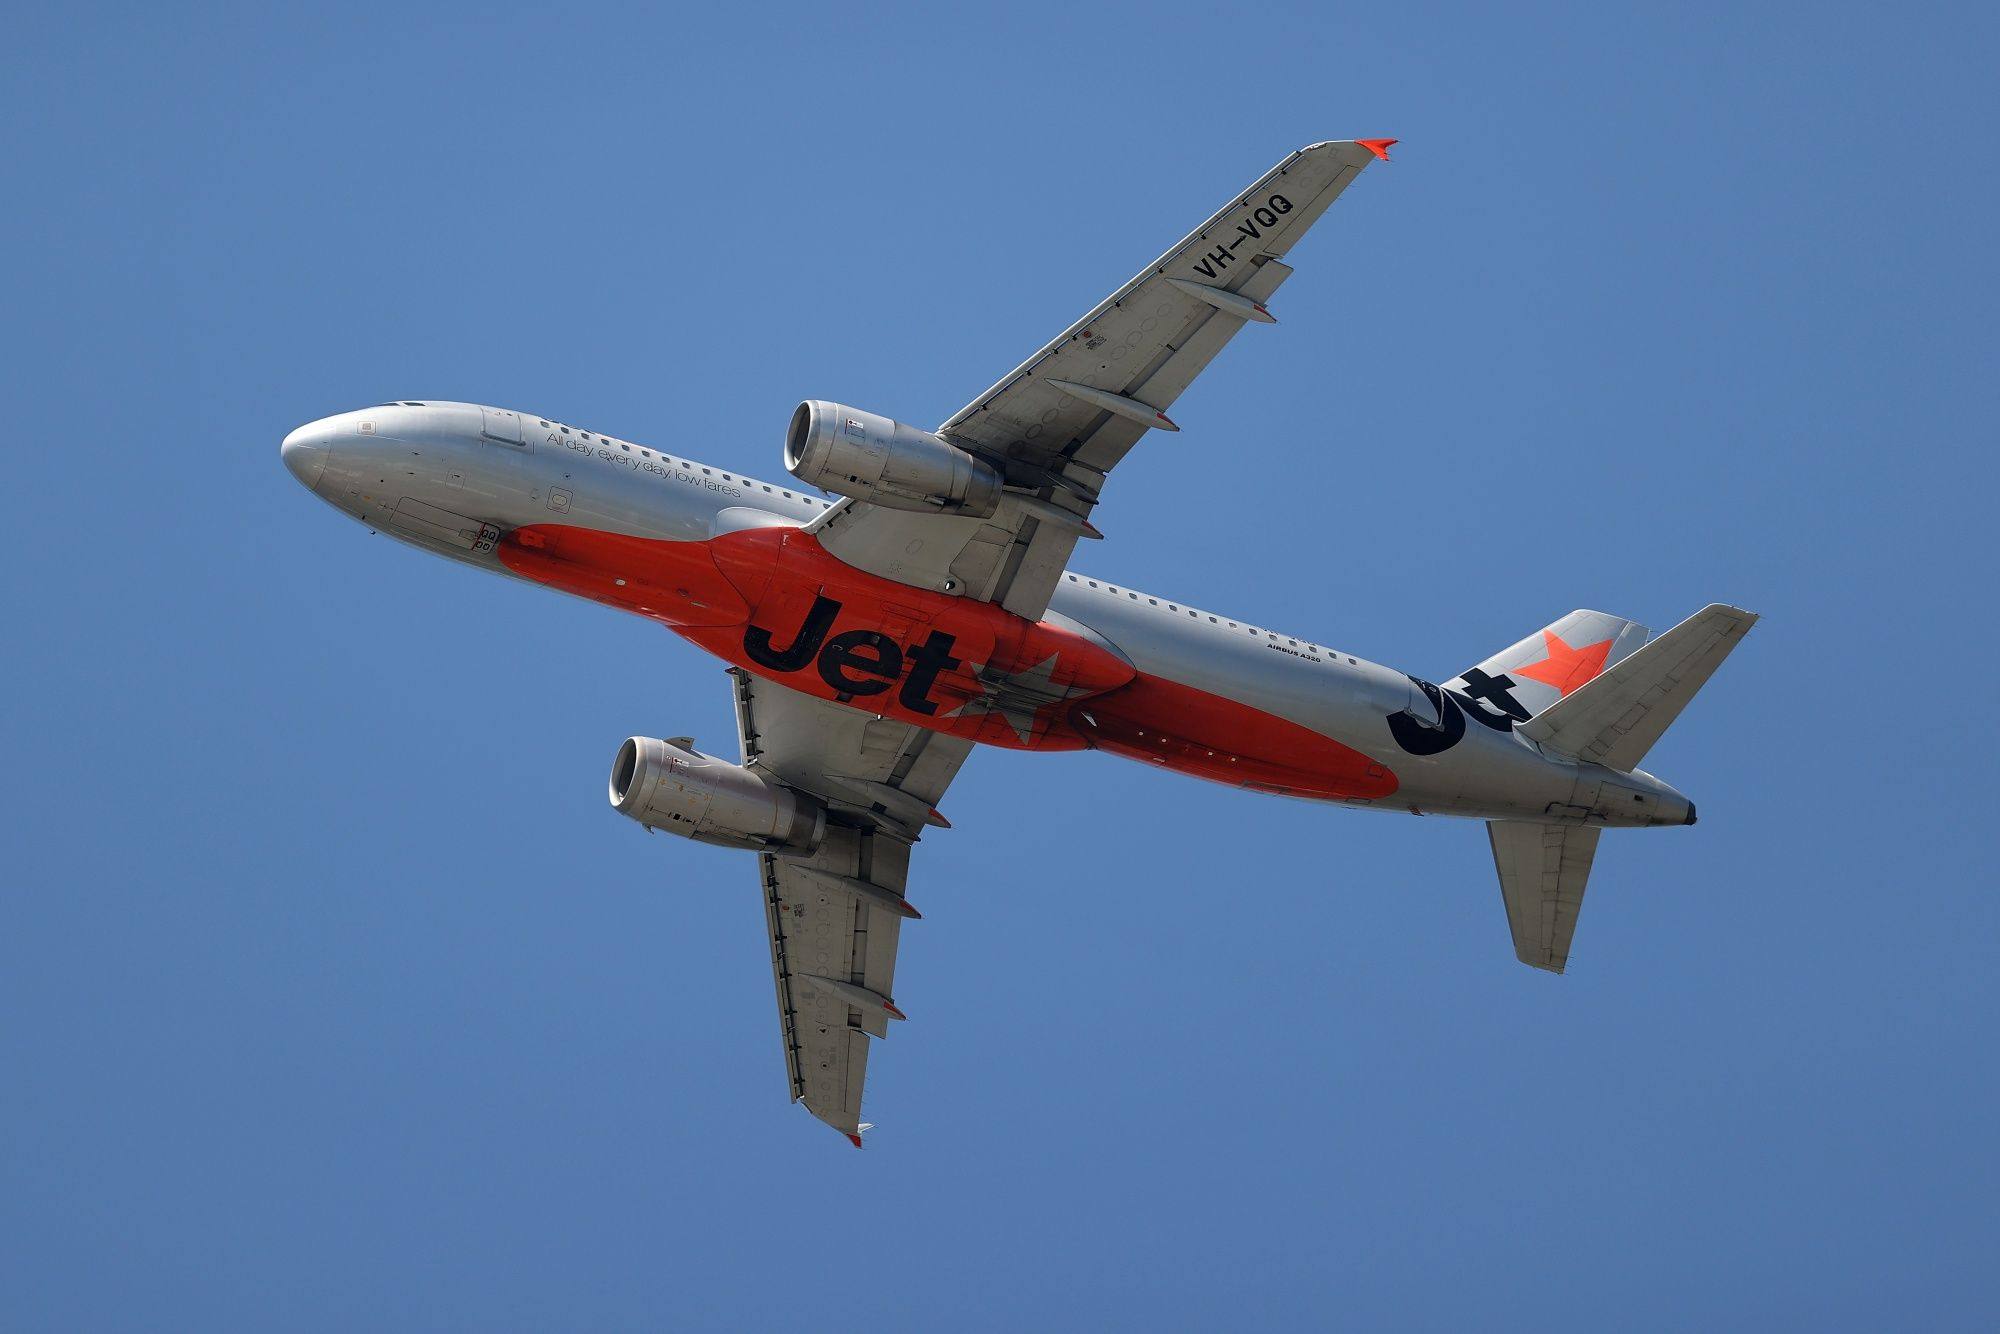 An Airbus SE A320-232 aircraft operated by Jetstar Airways takes off from Sydney Airport earlier this month. Photo: Bloomberg